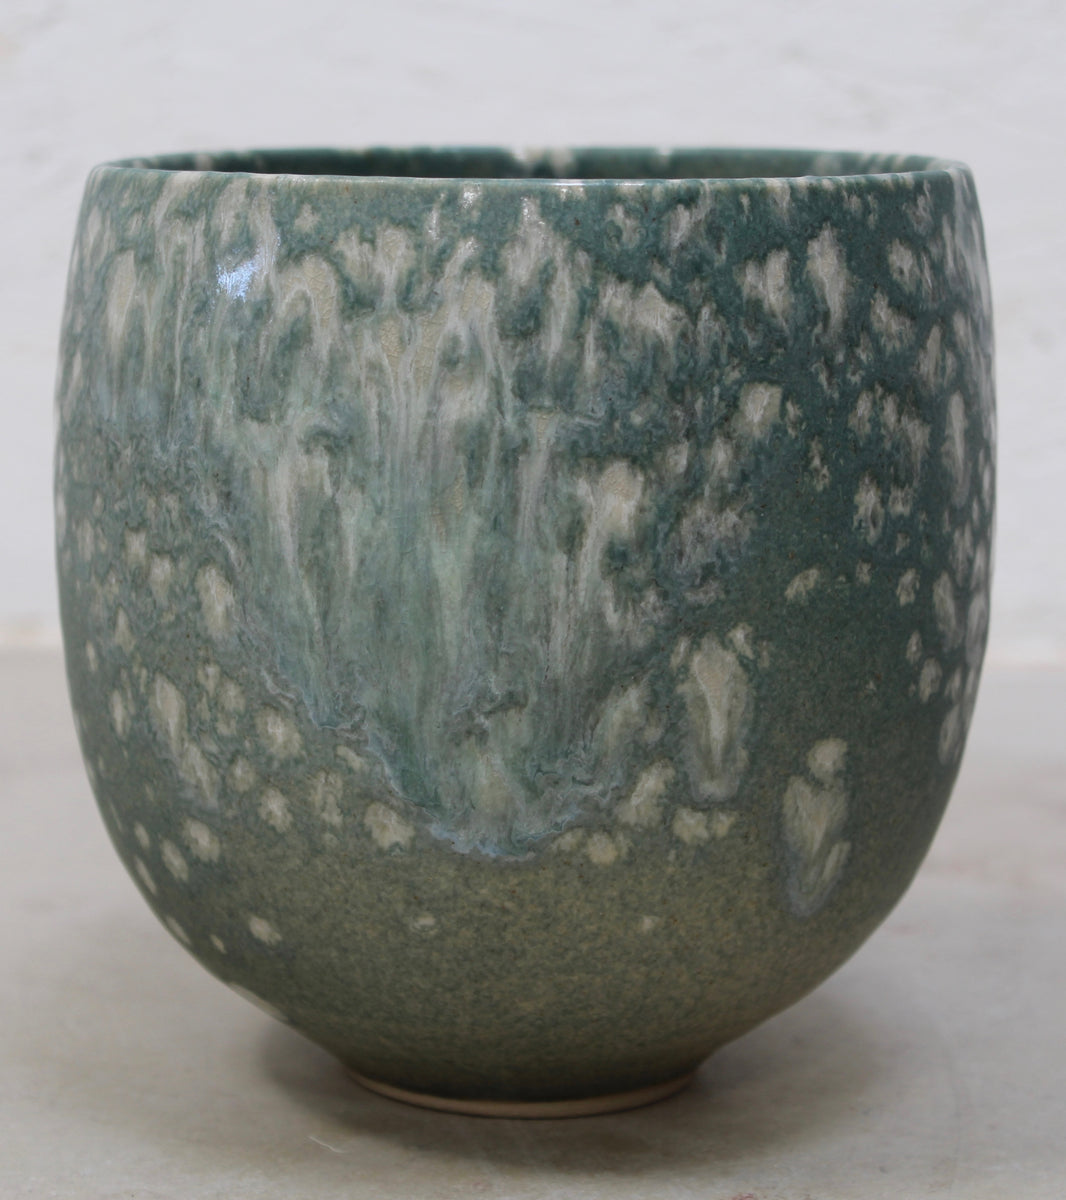 Small Eastern Bell Shaped Pot <br> White & Teal Glaze